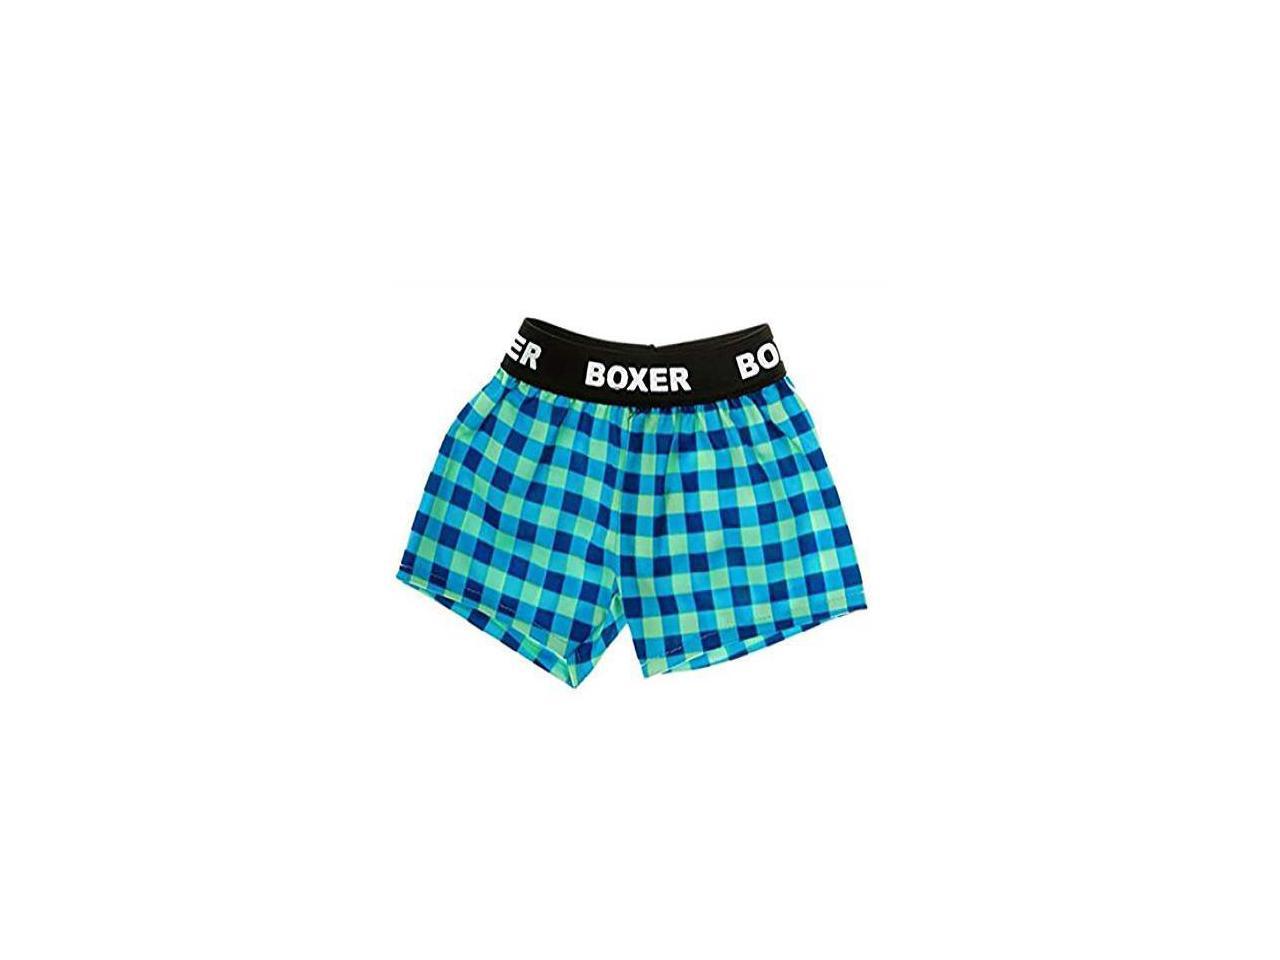 flannel boxer shorts teddy bear clothes fit 14